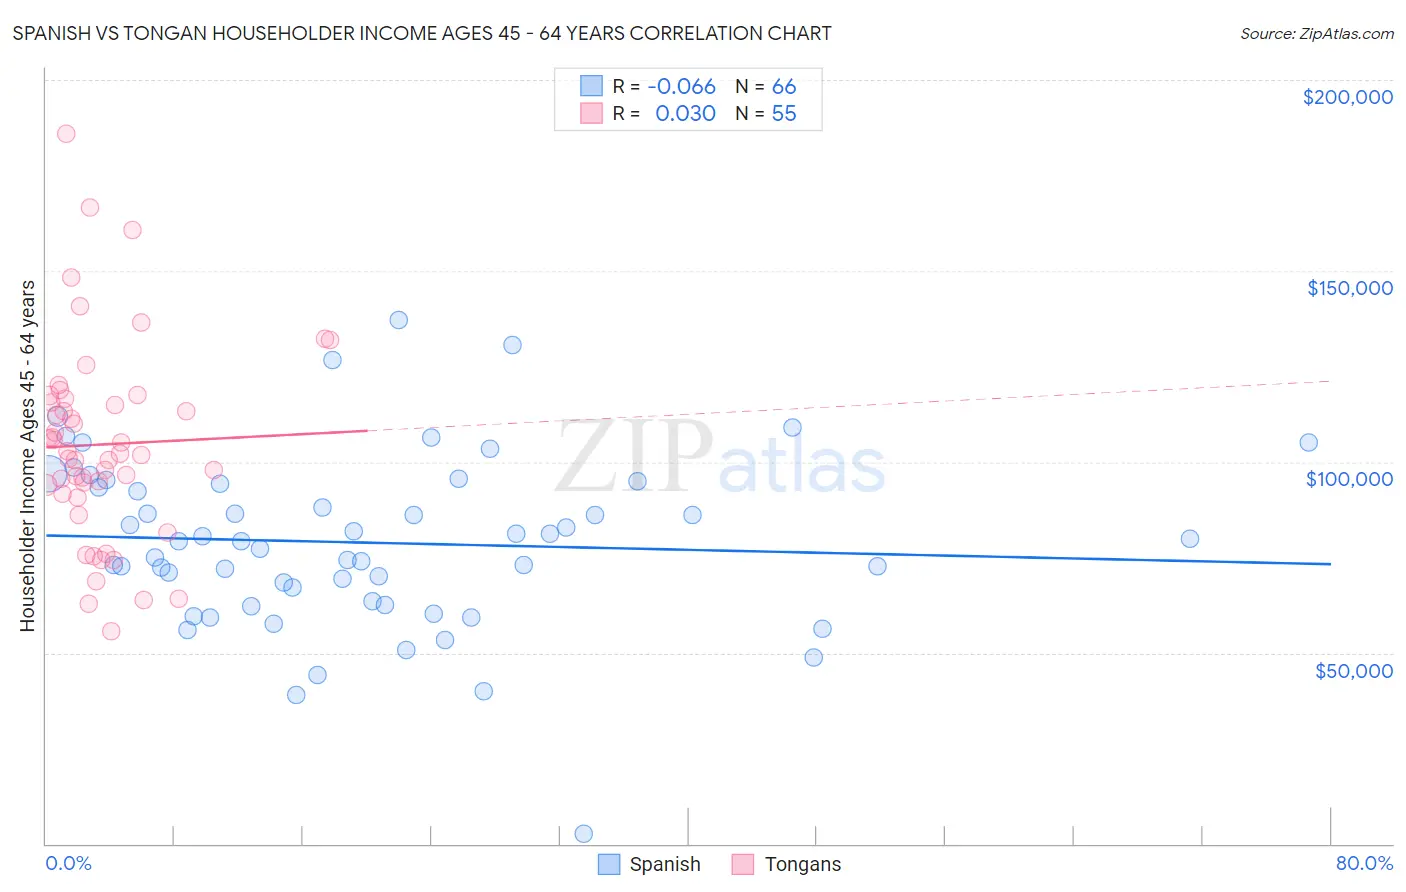 Spanish vs Tongan Householder Income Ages 45 - 64 years